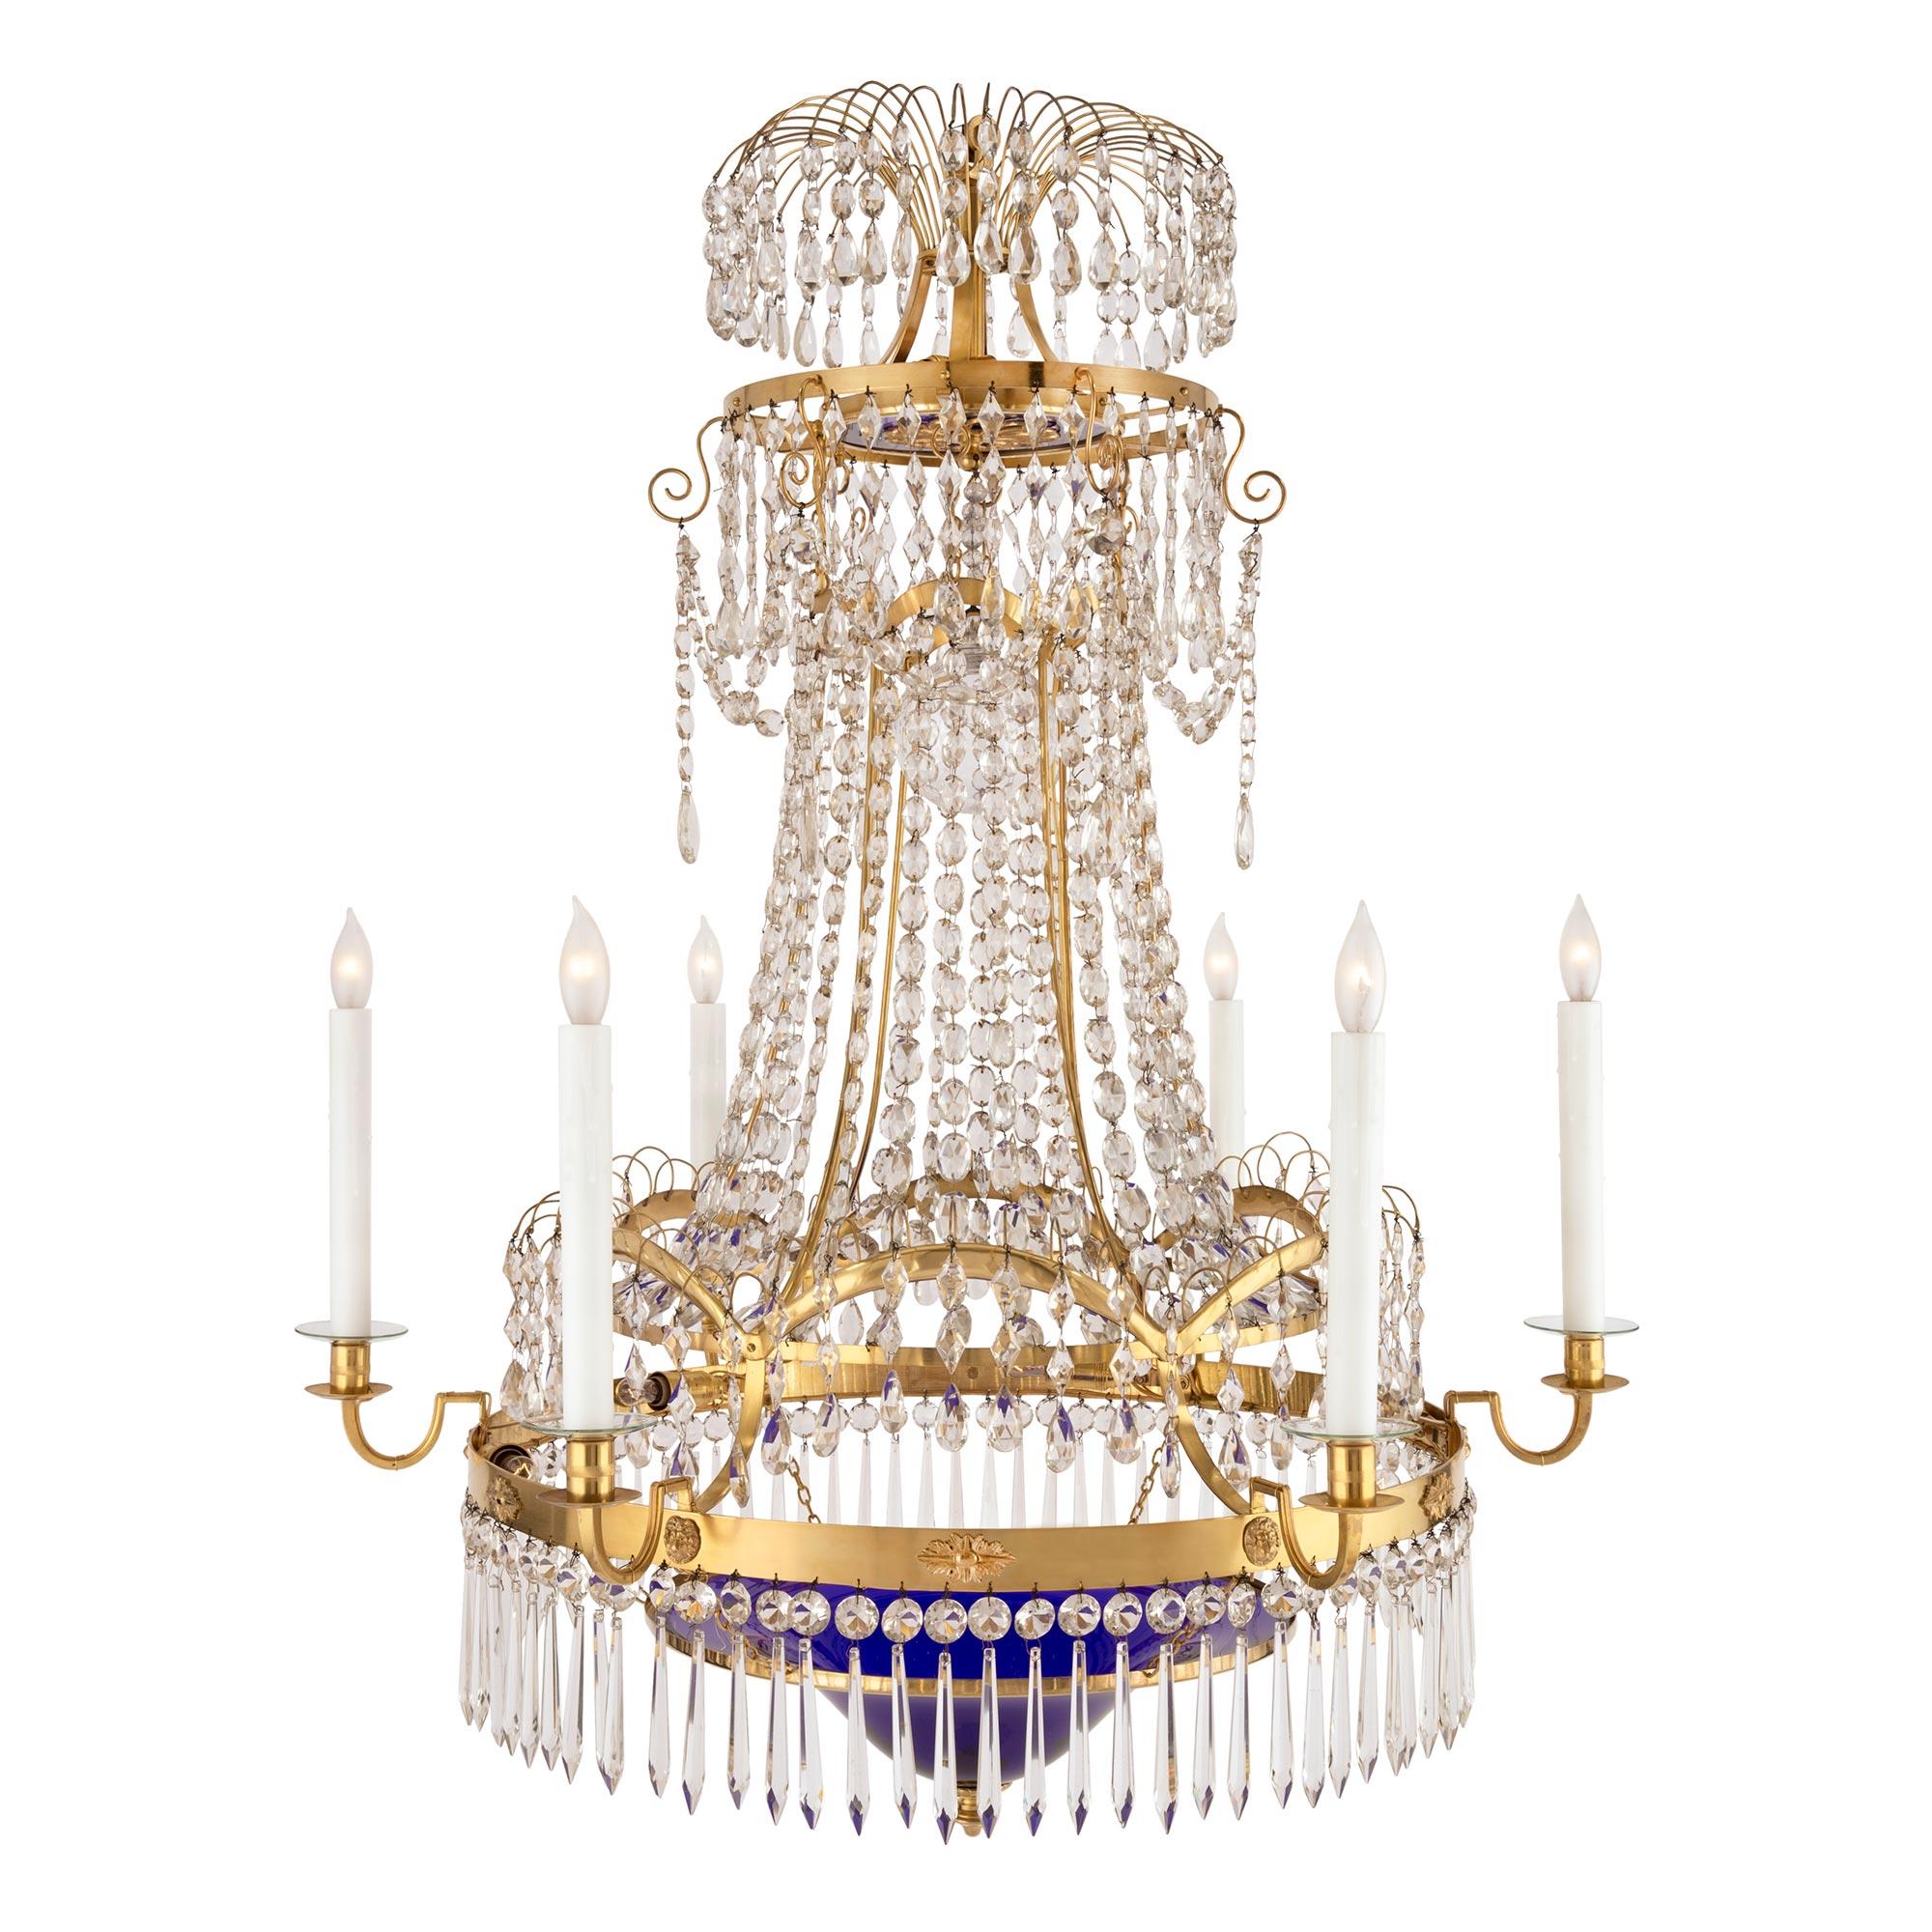 A stunning Baltic 18th century neo-classical st. ormolu, crystal and cobalt blue glass six arm, fourteen light chandelier. The chandelier is centered by a fine bottom ormolu foliate finial below the beautiful original cobalt blue glass with a unique